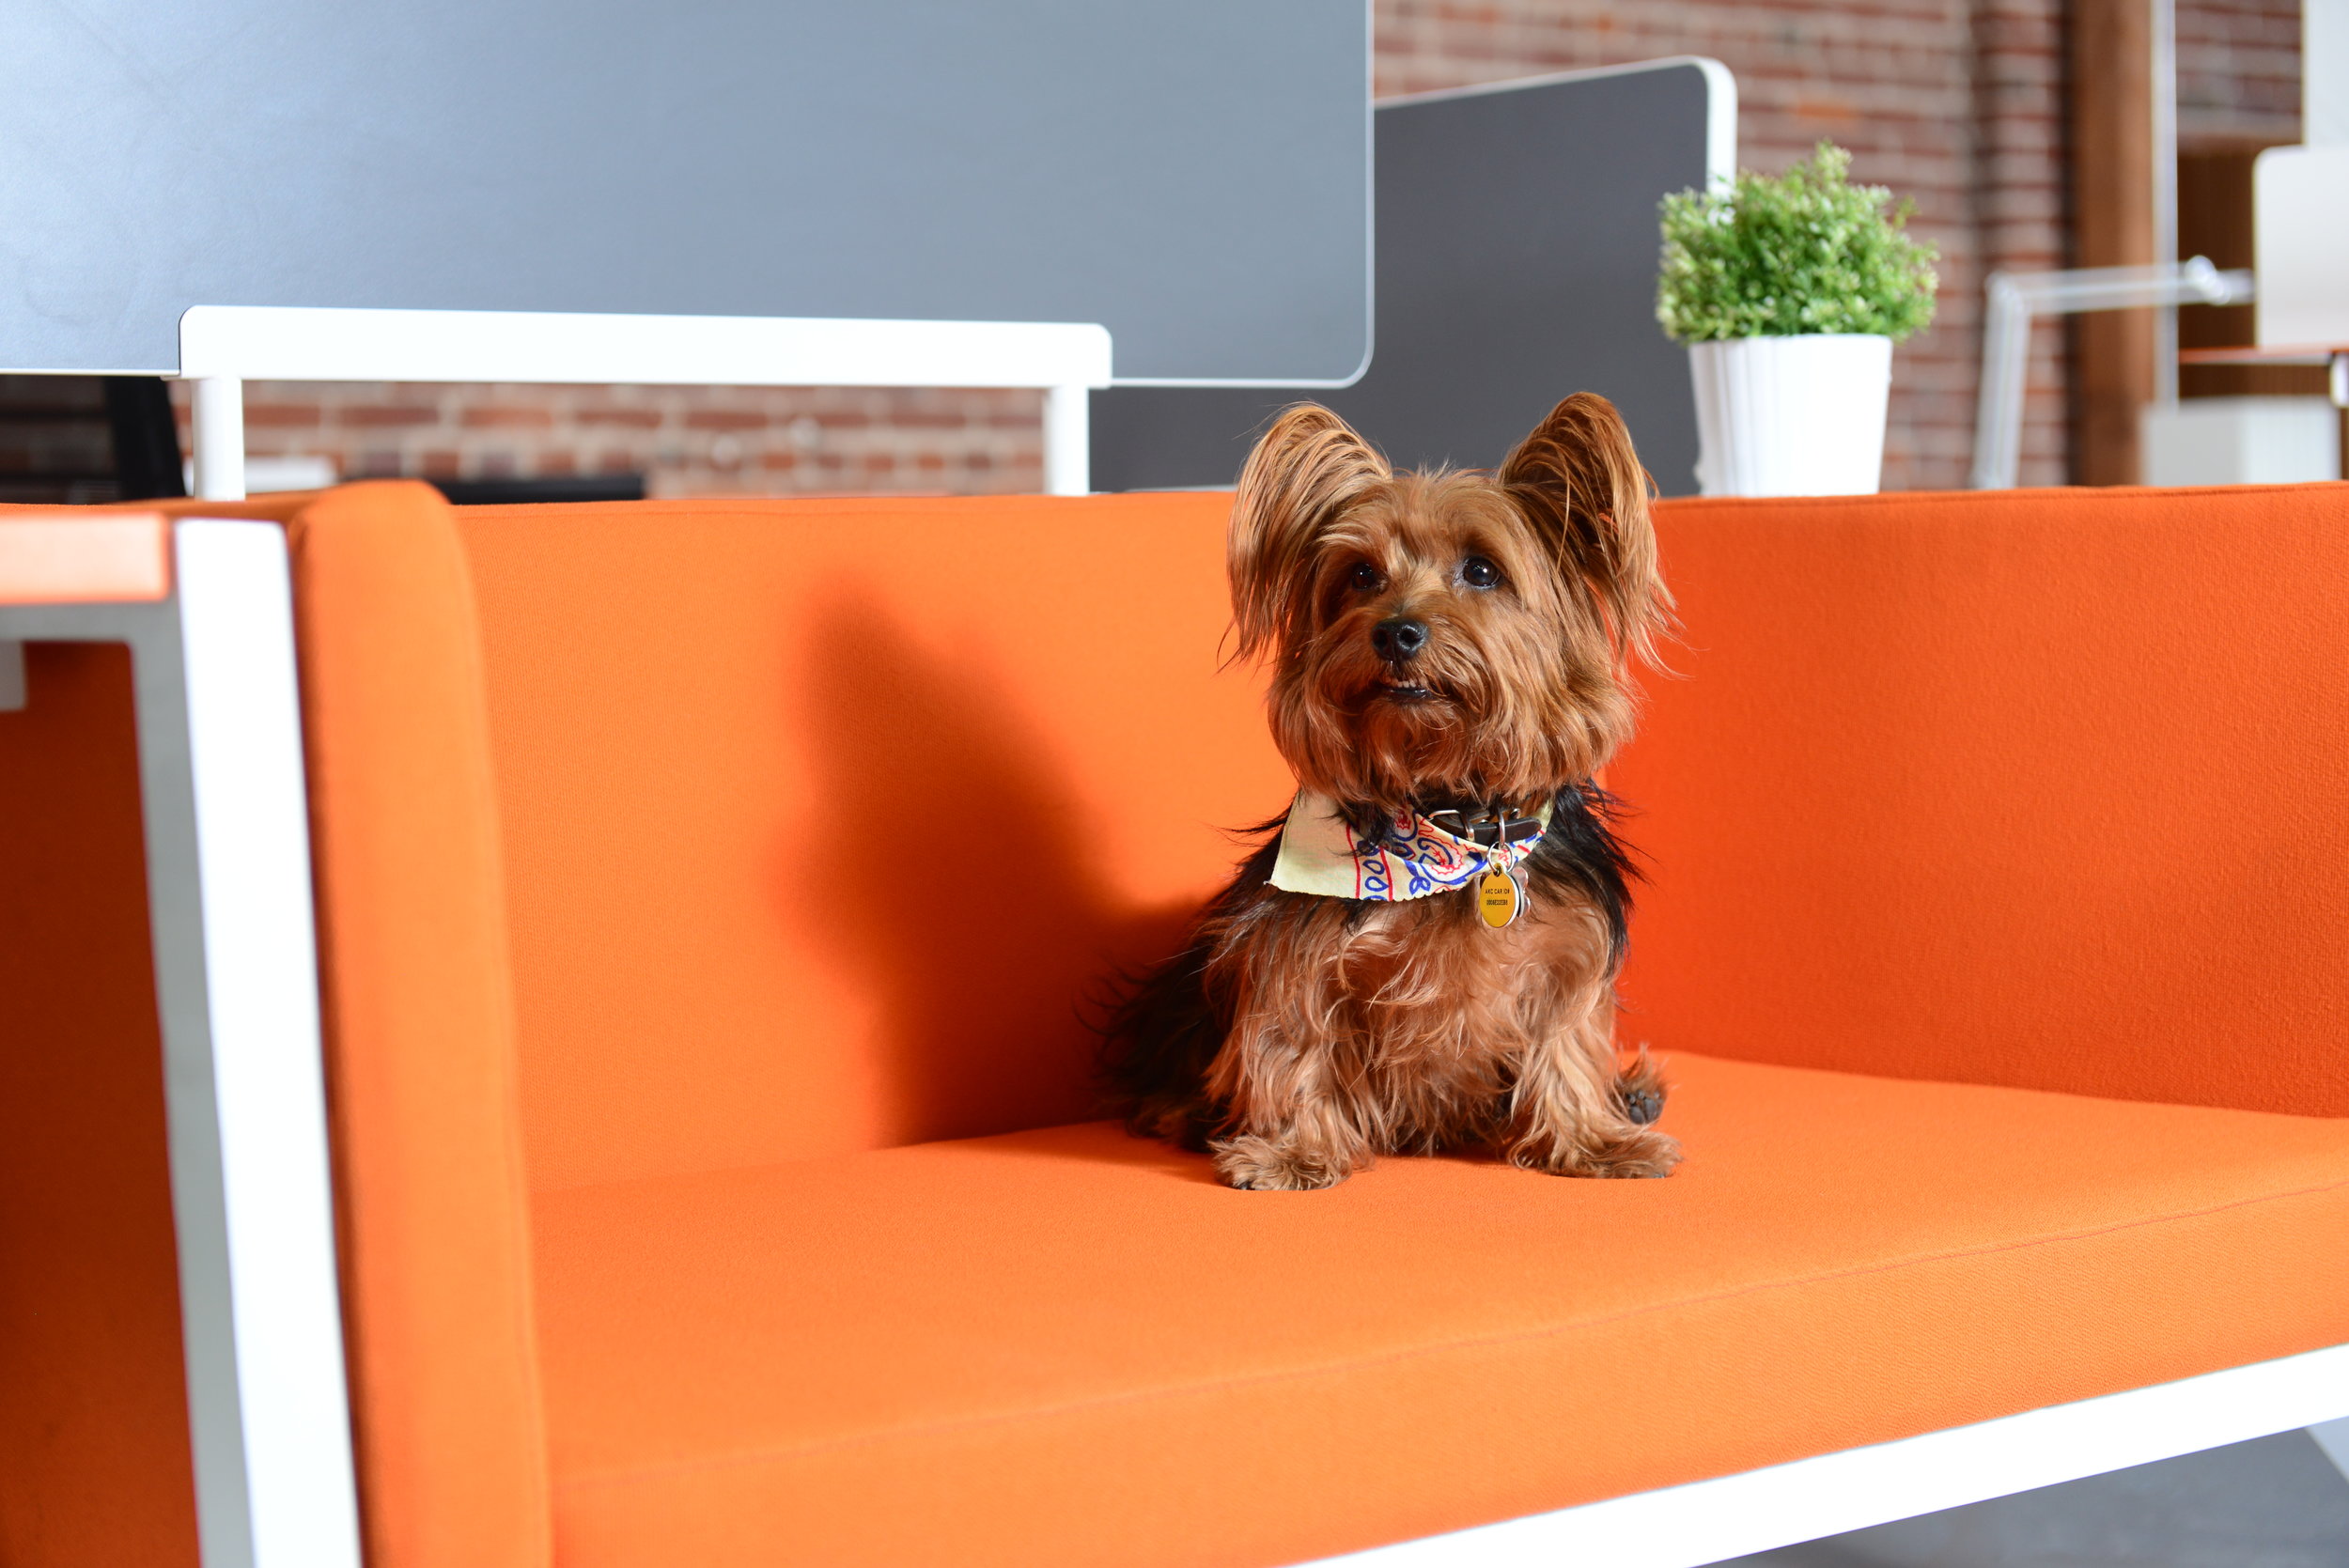 G-Series Workstation close-up on orange lounge with Yorkie puppy